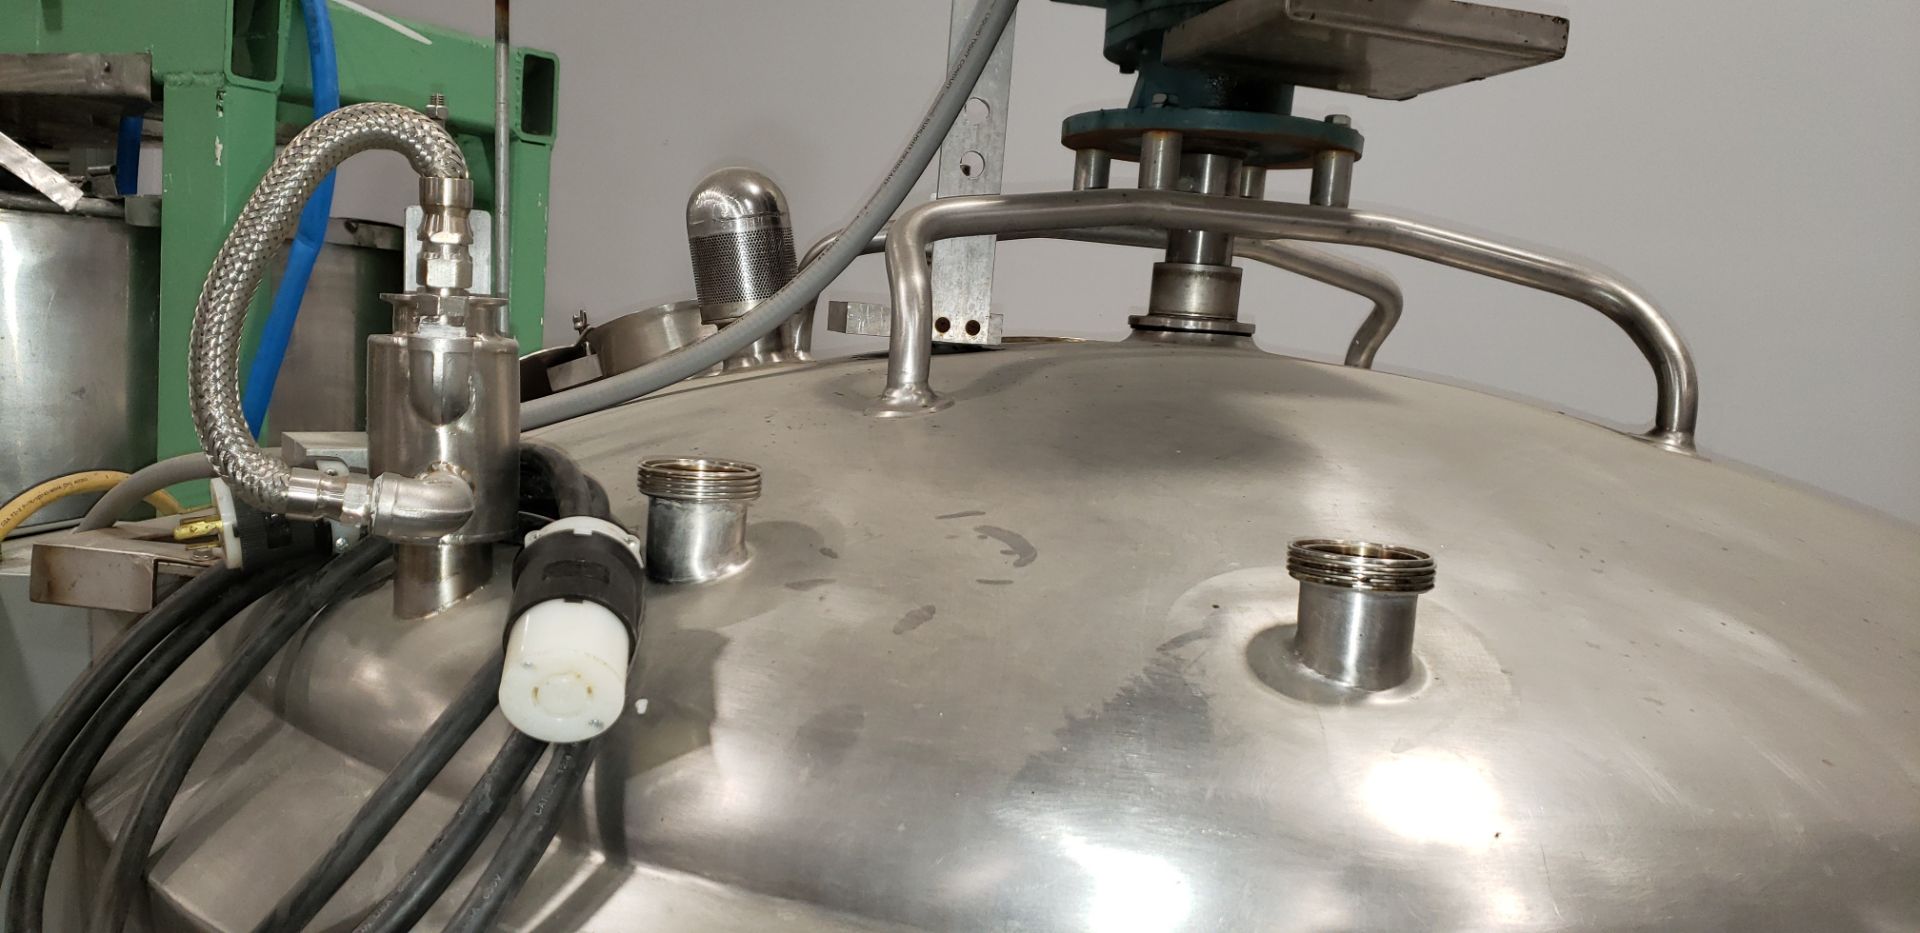 Crepaco Jacketed Stainless Steel Tank - Image 10 of 18